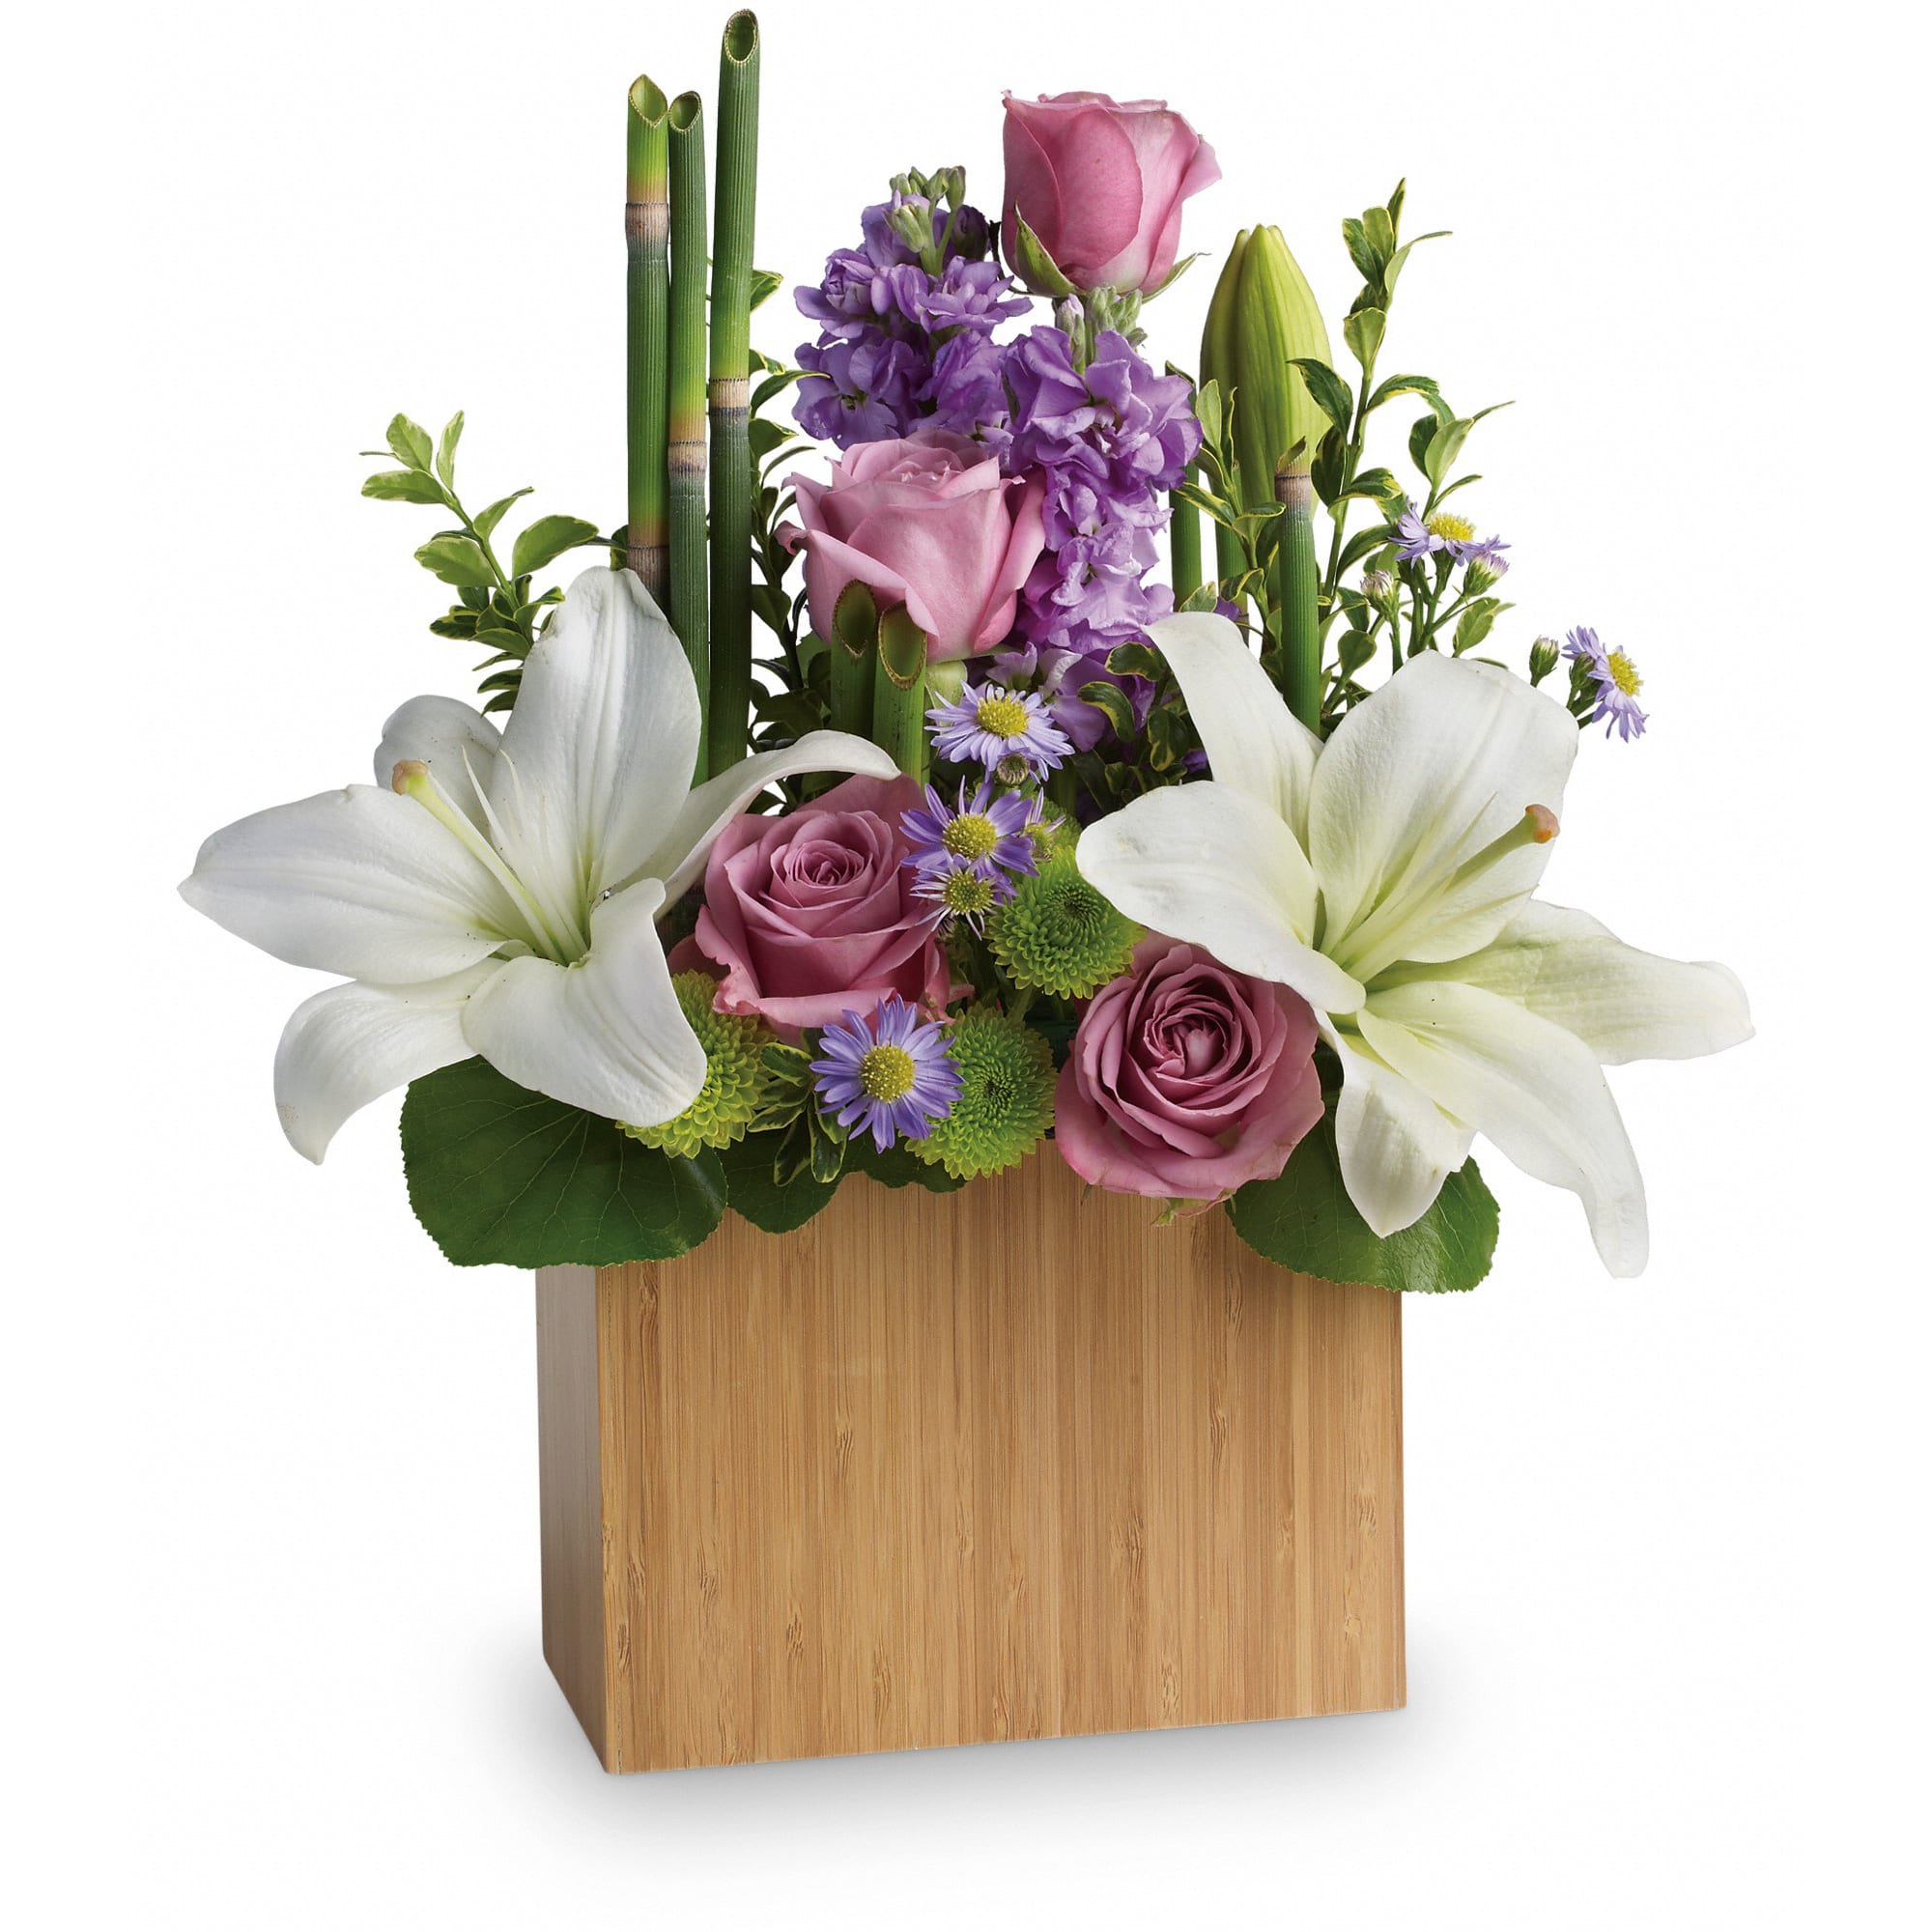 Kissed with Bliss by Teleflora - An elegant way to show you care, this bit of bliss blends luxurious lavender roses with wondrous white lilies into a stunning floral sculpture. Accented with exotic greens and presented in a modern bamboo rectangular vase, it brings natural serenity to any space.